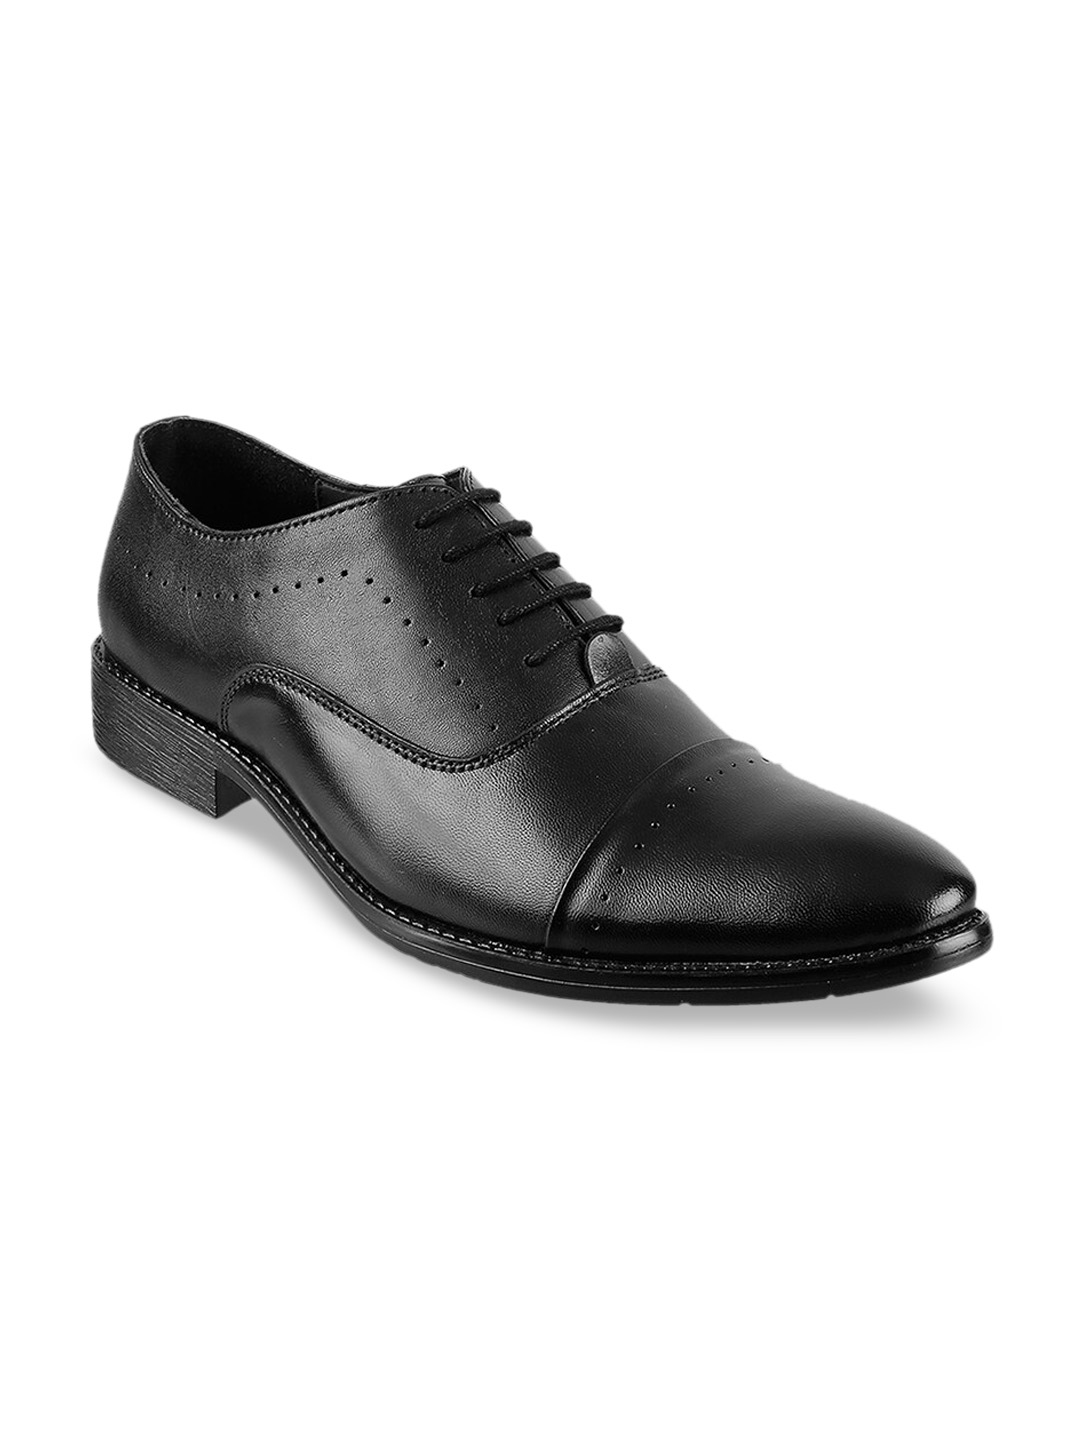 Buy Metro Men Black Solid Formal Leather Oxford Shoes - Formal Shoes ...